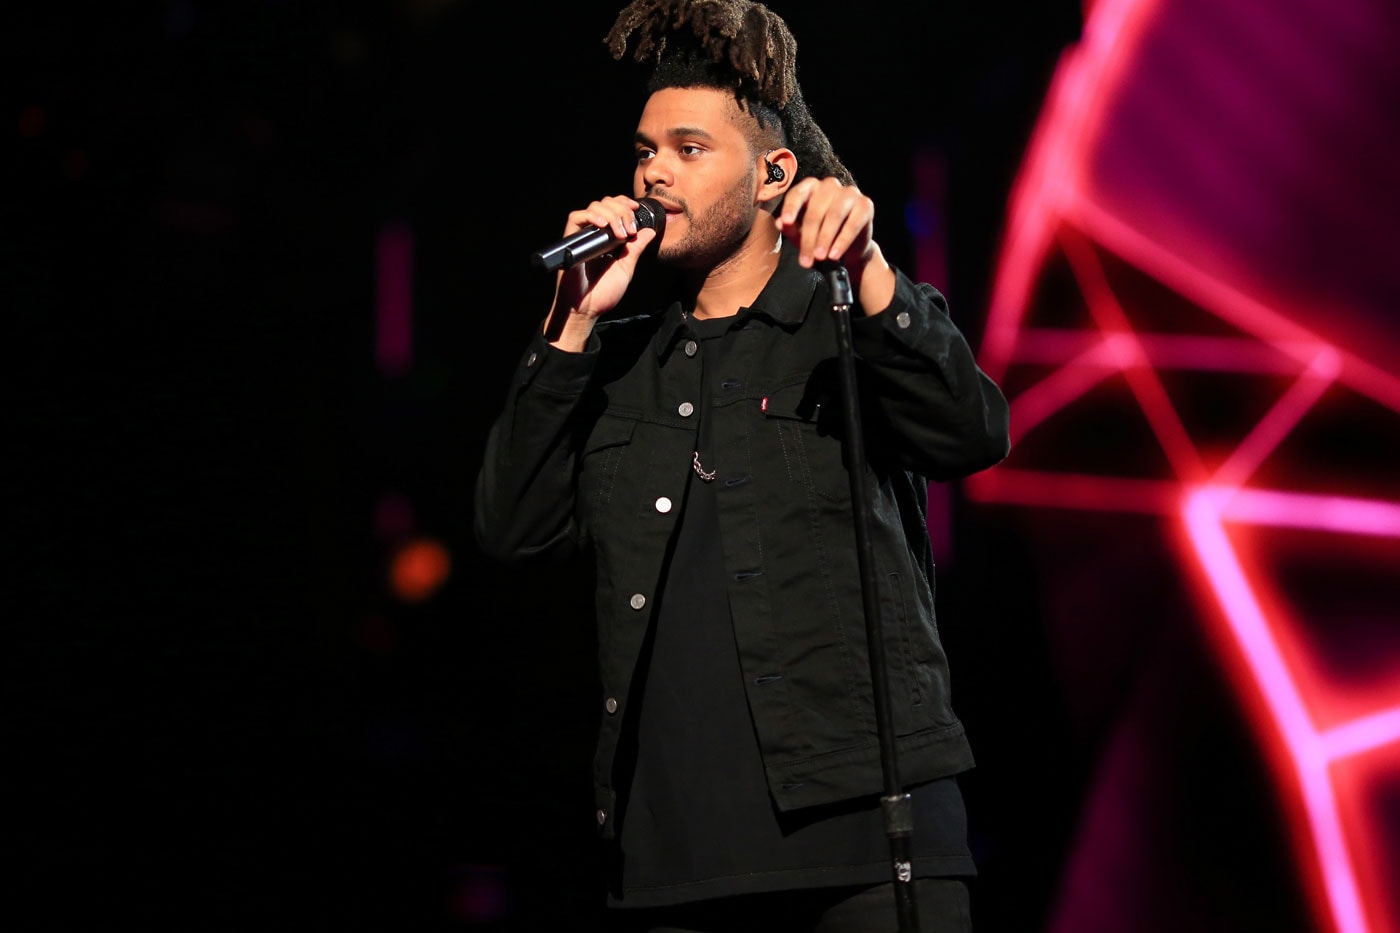 Stream The Weeknd's 'Beauty Behind The Madness' Now